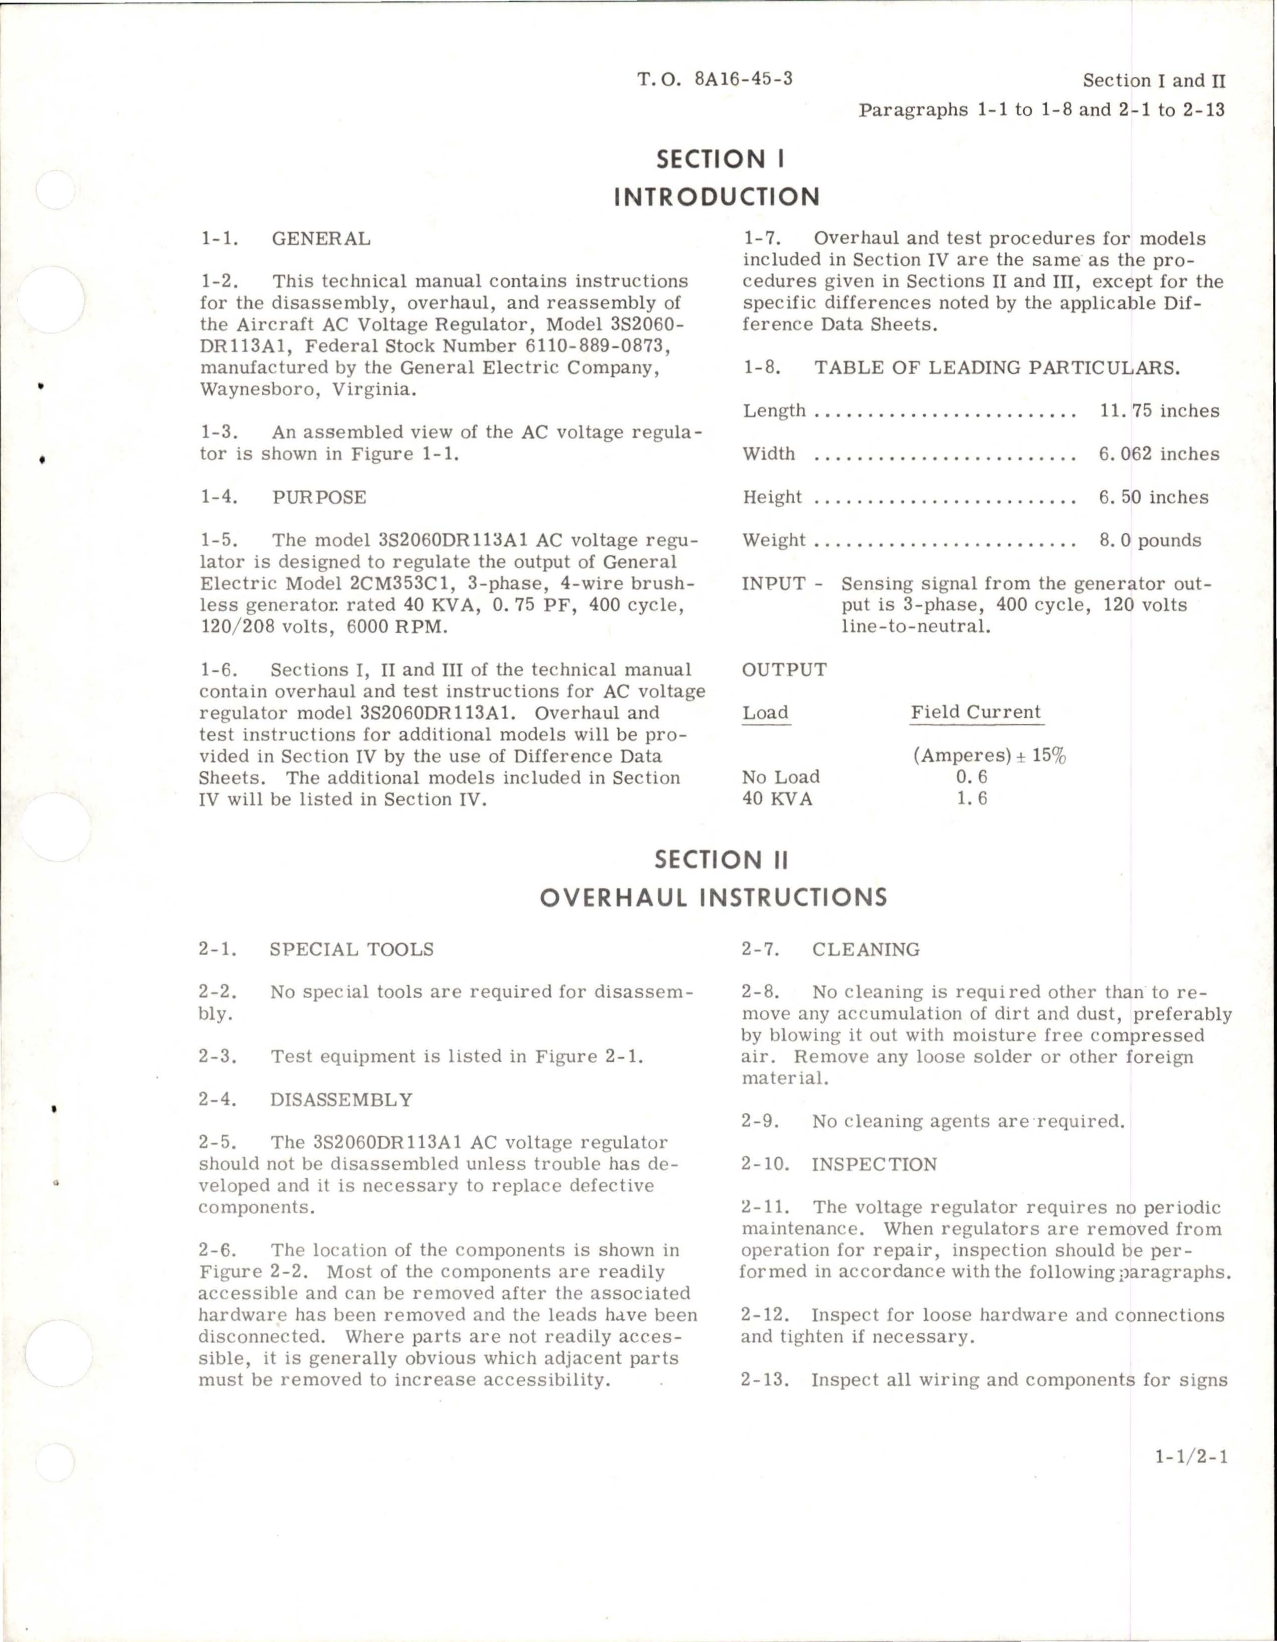 Sample page 5 from AirCorps Library document: Overhaul Instructions for AC Voltage Regulator - Model 3S2060DR113A1 